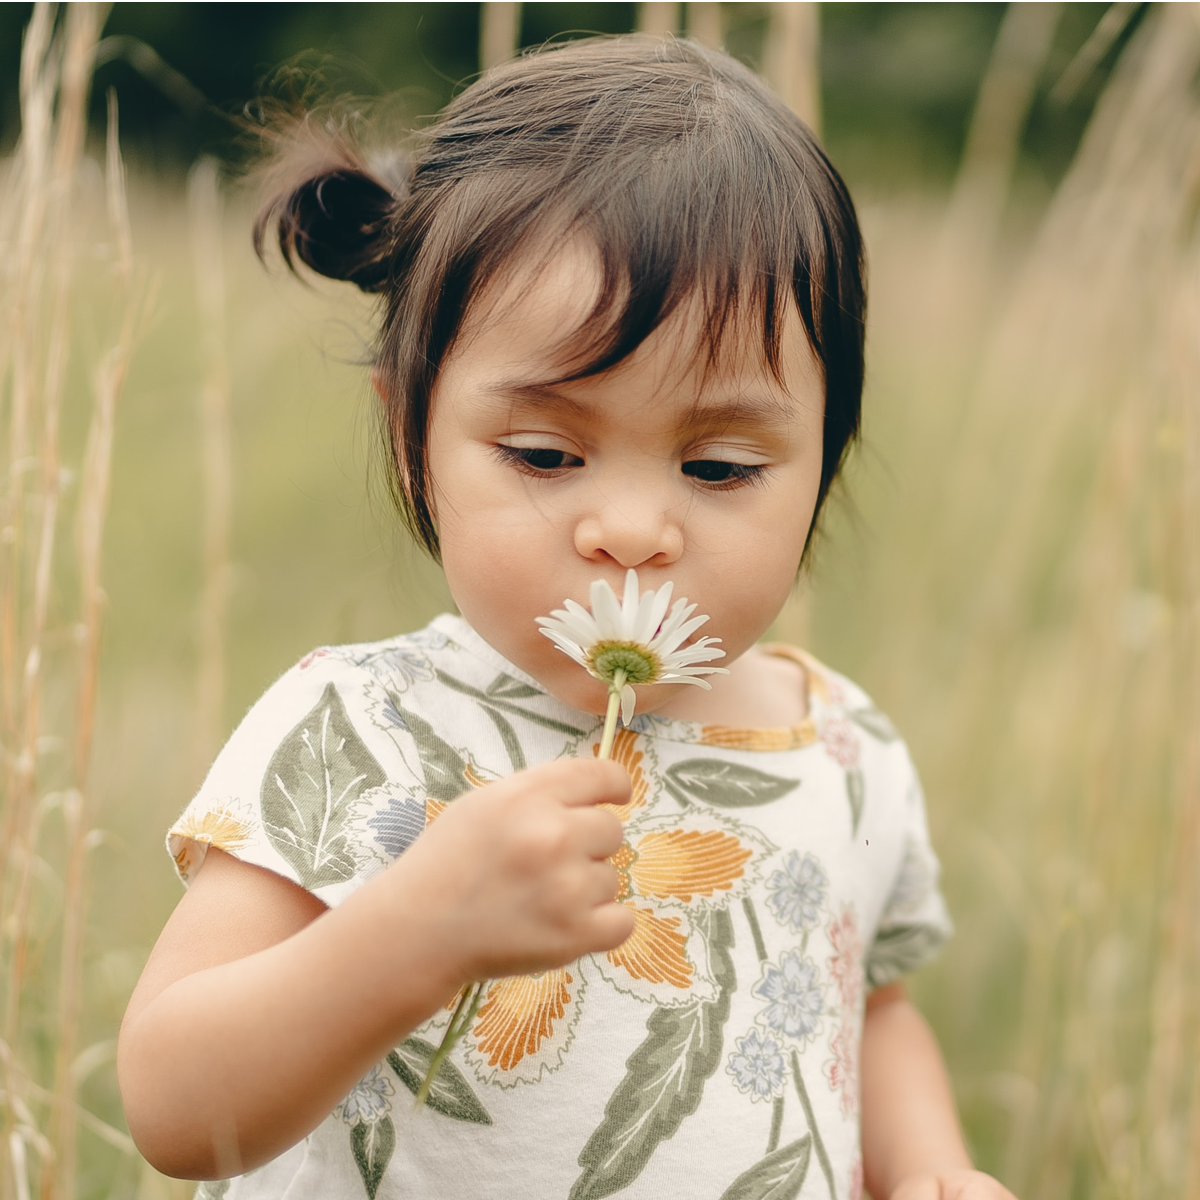 Toddler smelling flowers 